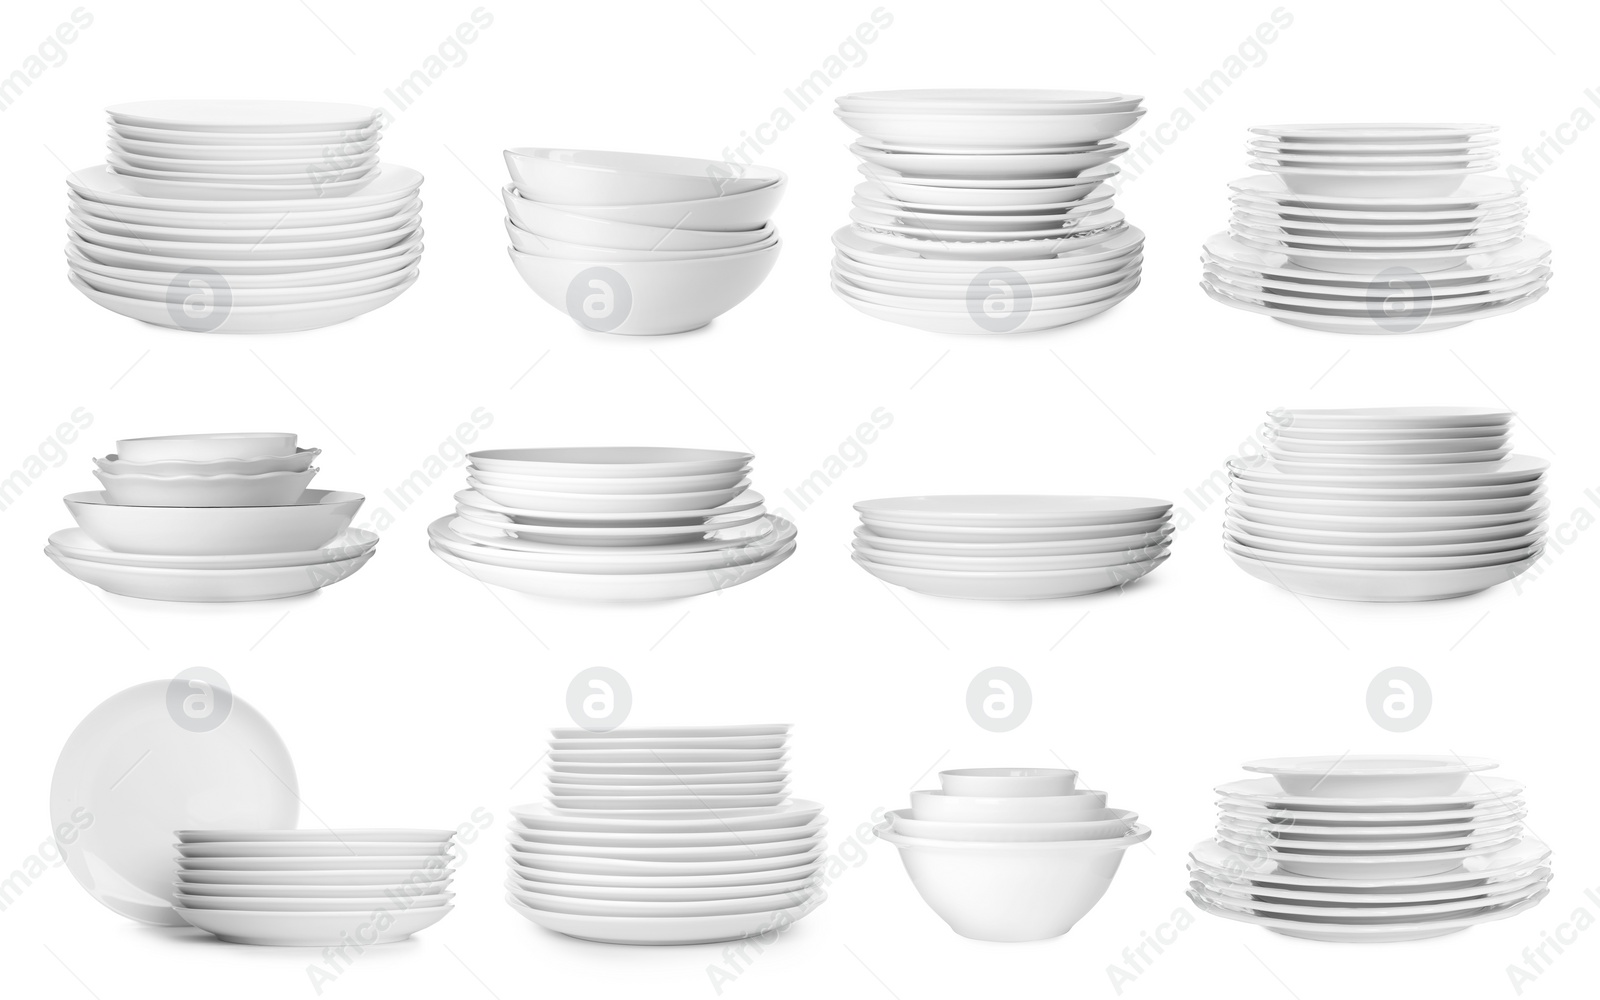 Image of Set with different clean dishware on white background